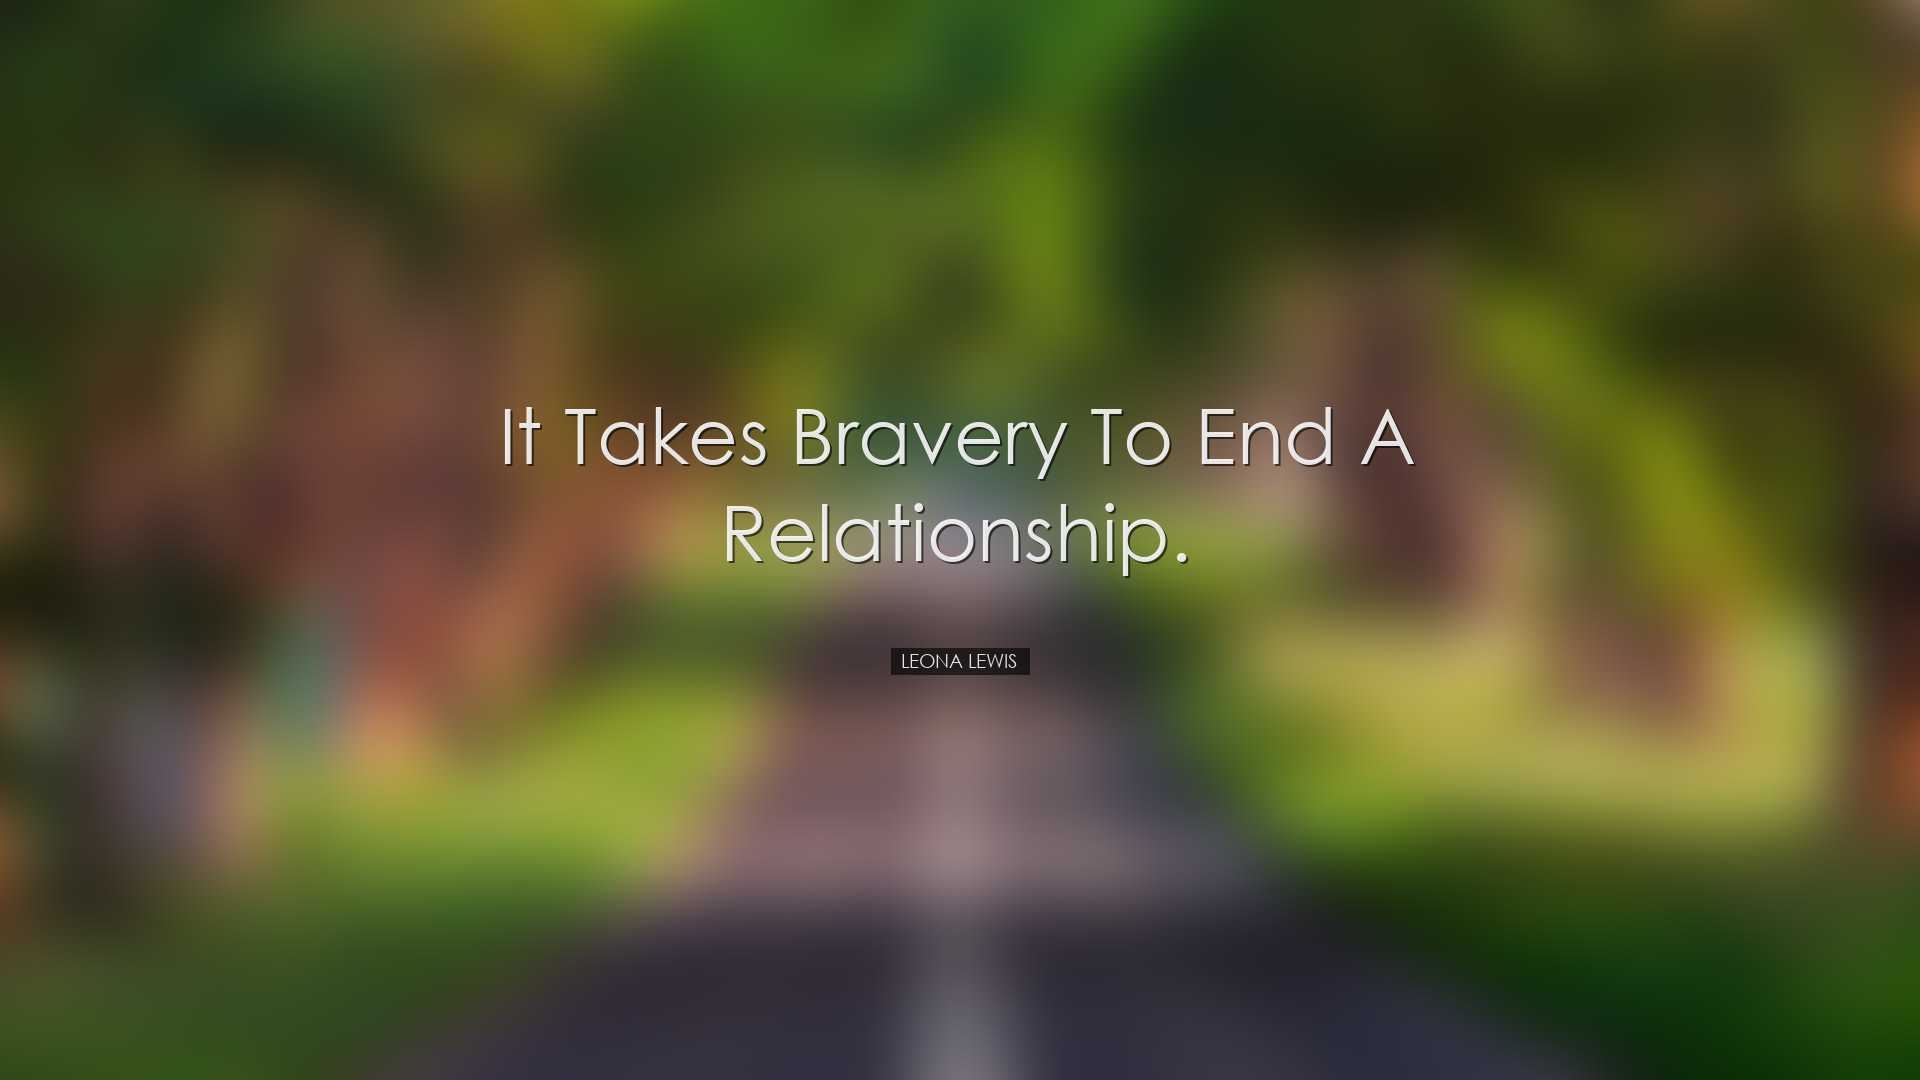 It takes bravery to end a relationship. - Leona Lewis